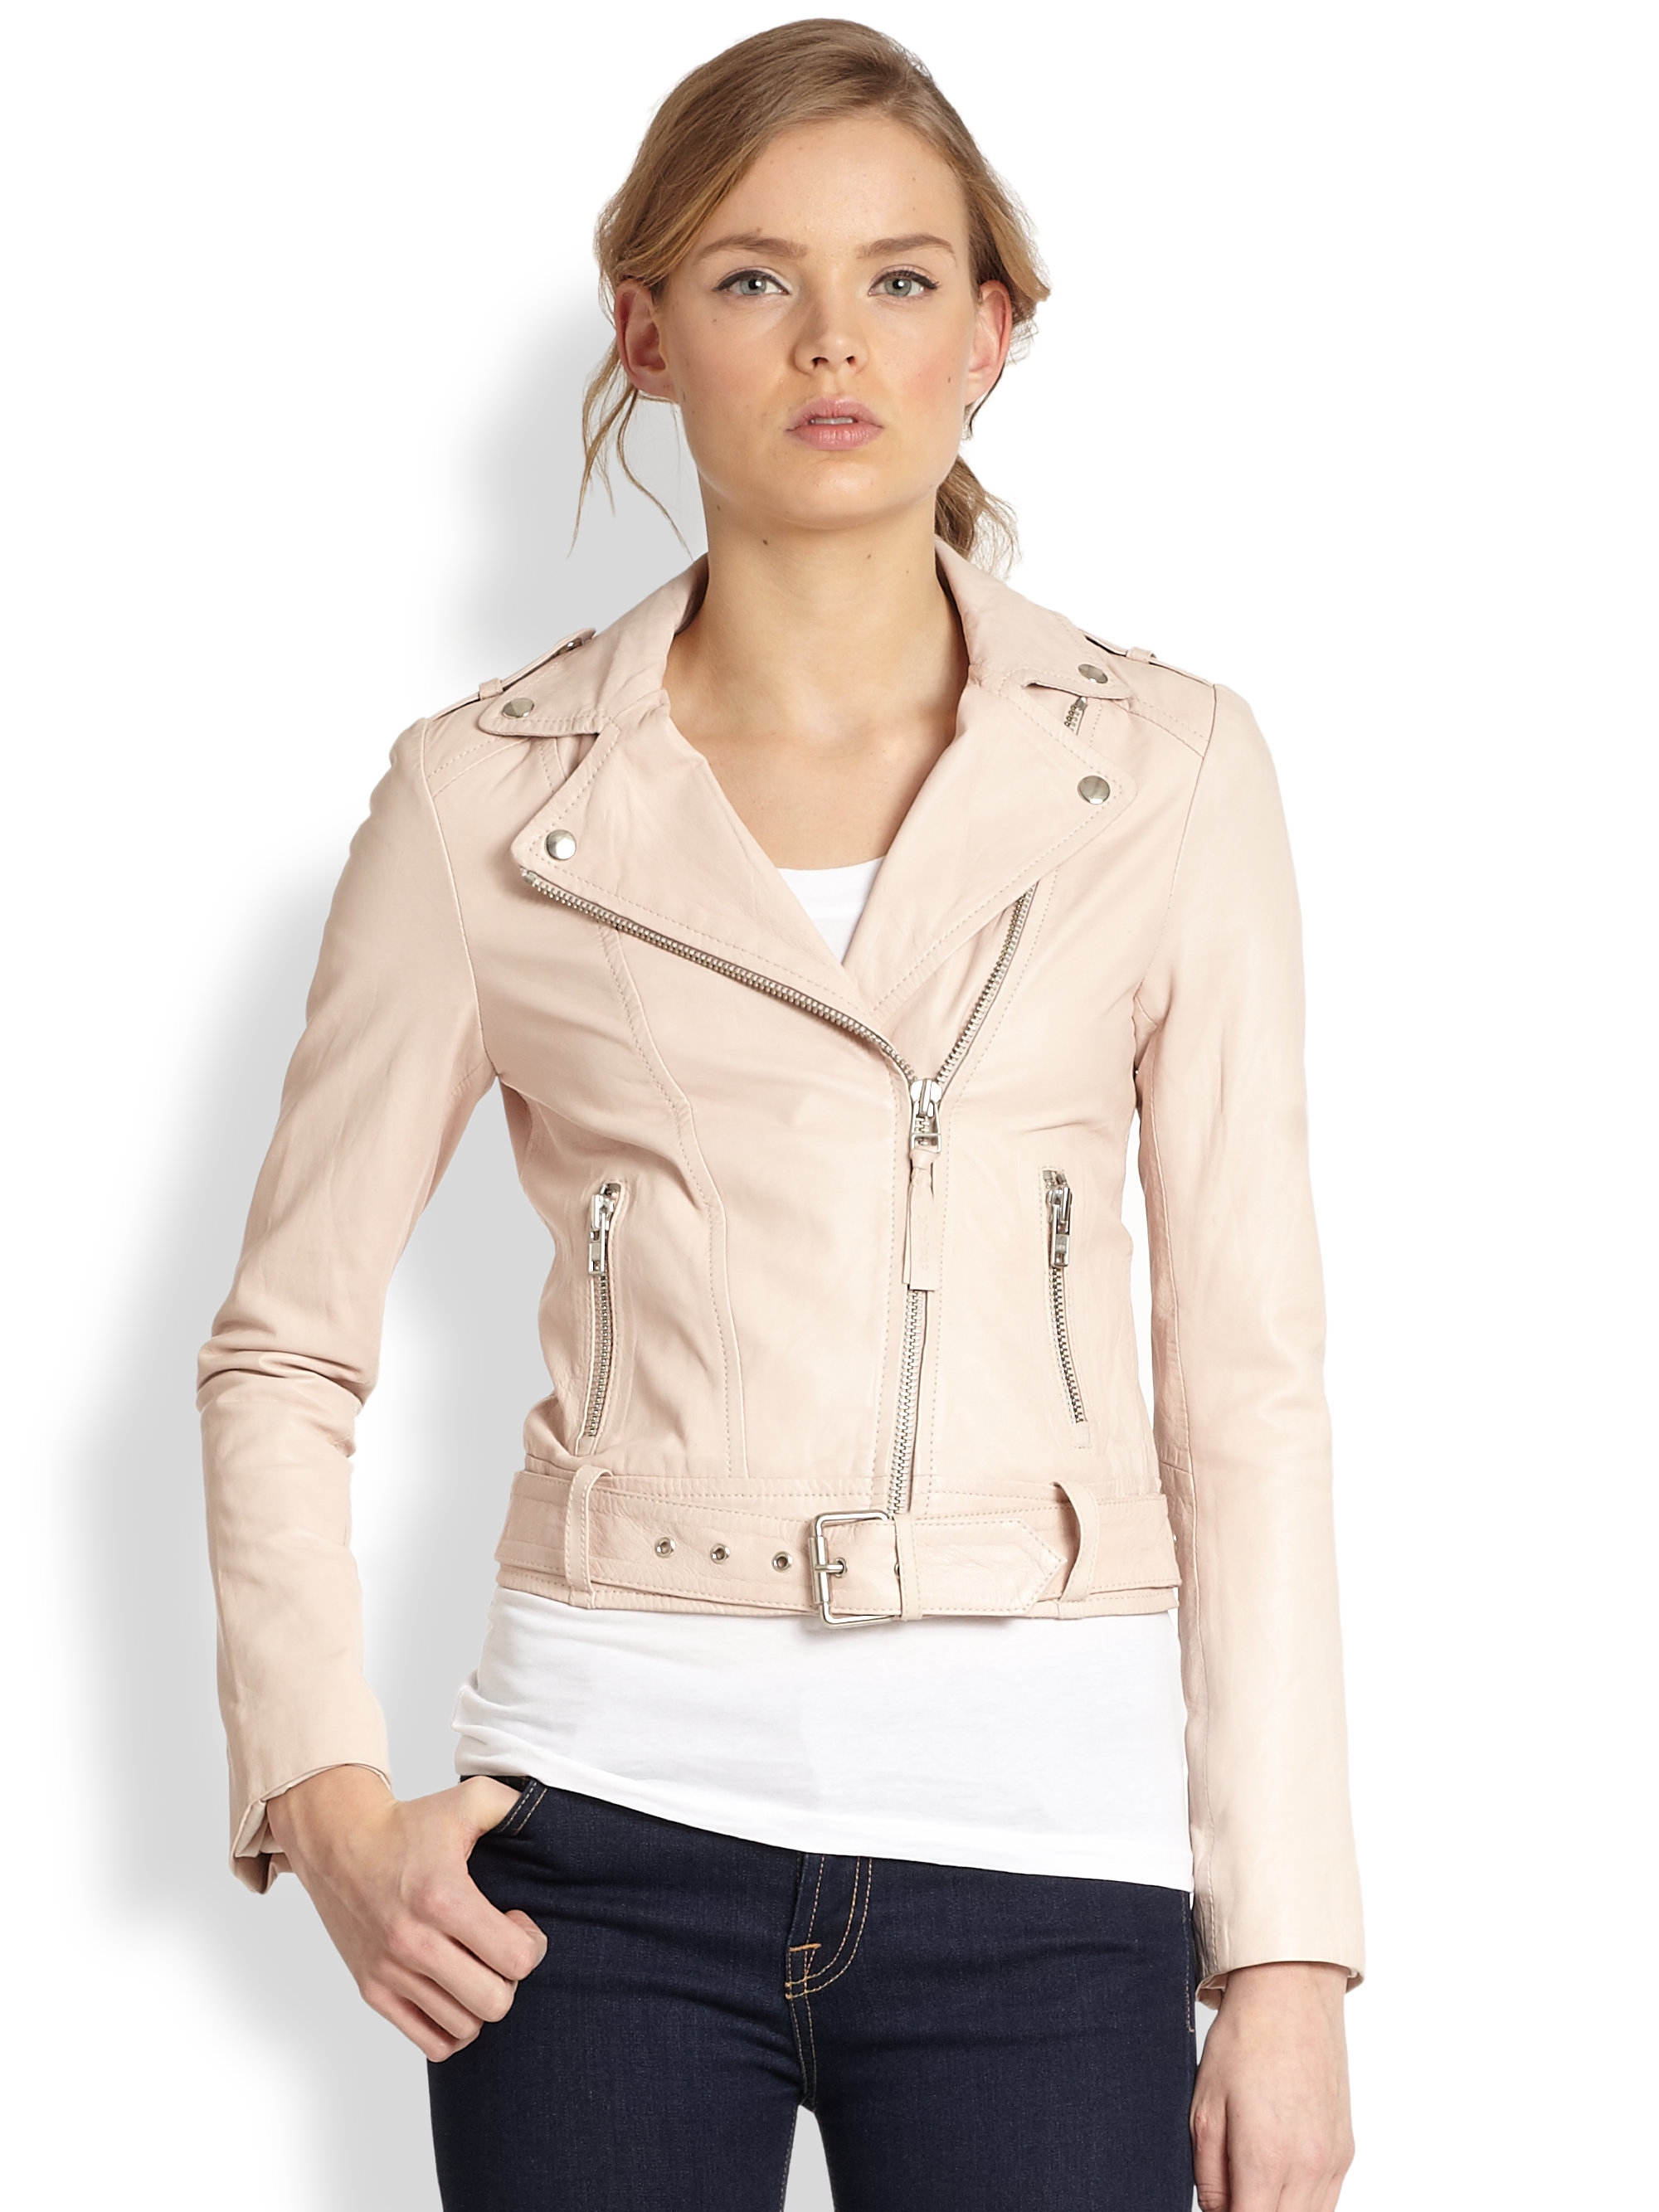 Lyst - Mackage Leather Motorcycle Jacket in Pink